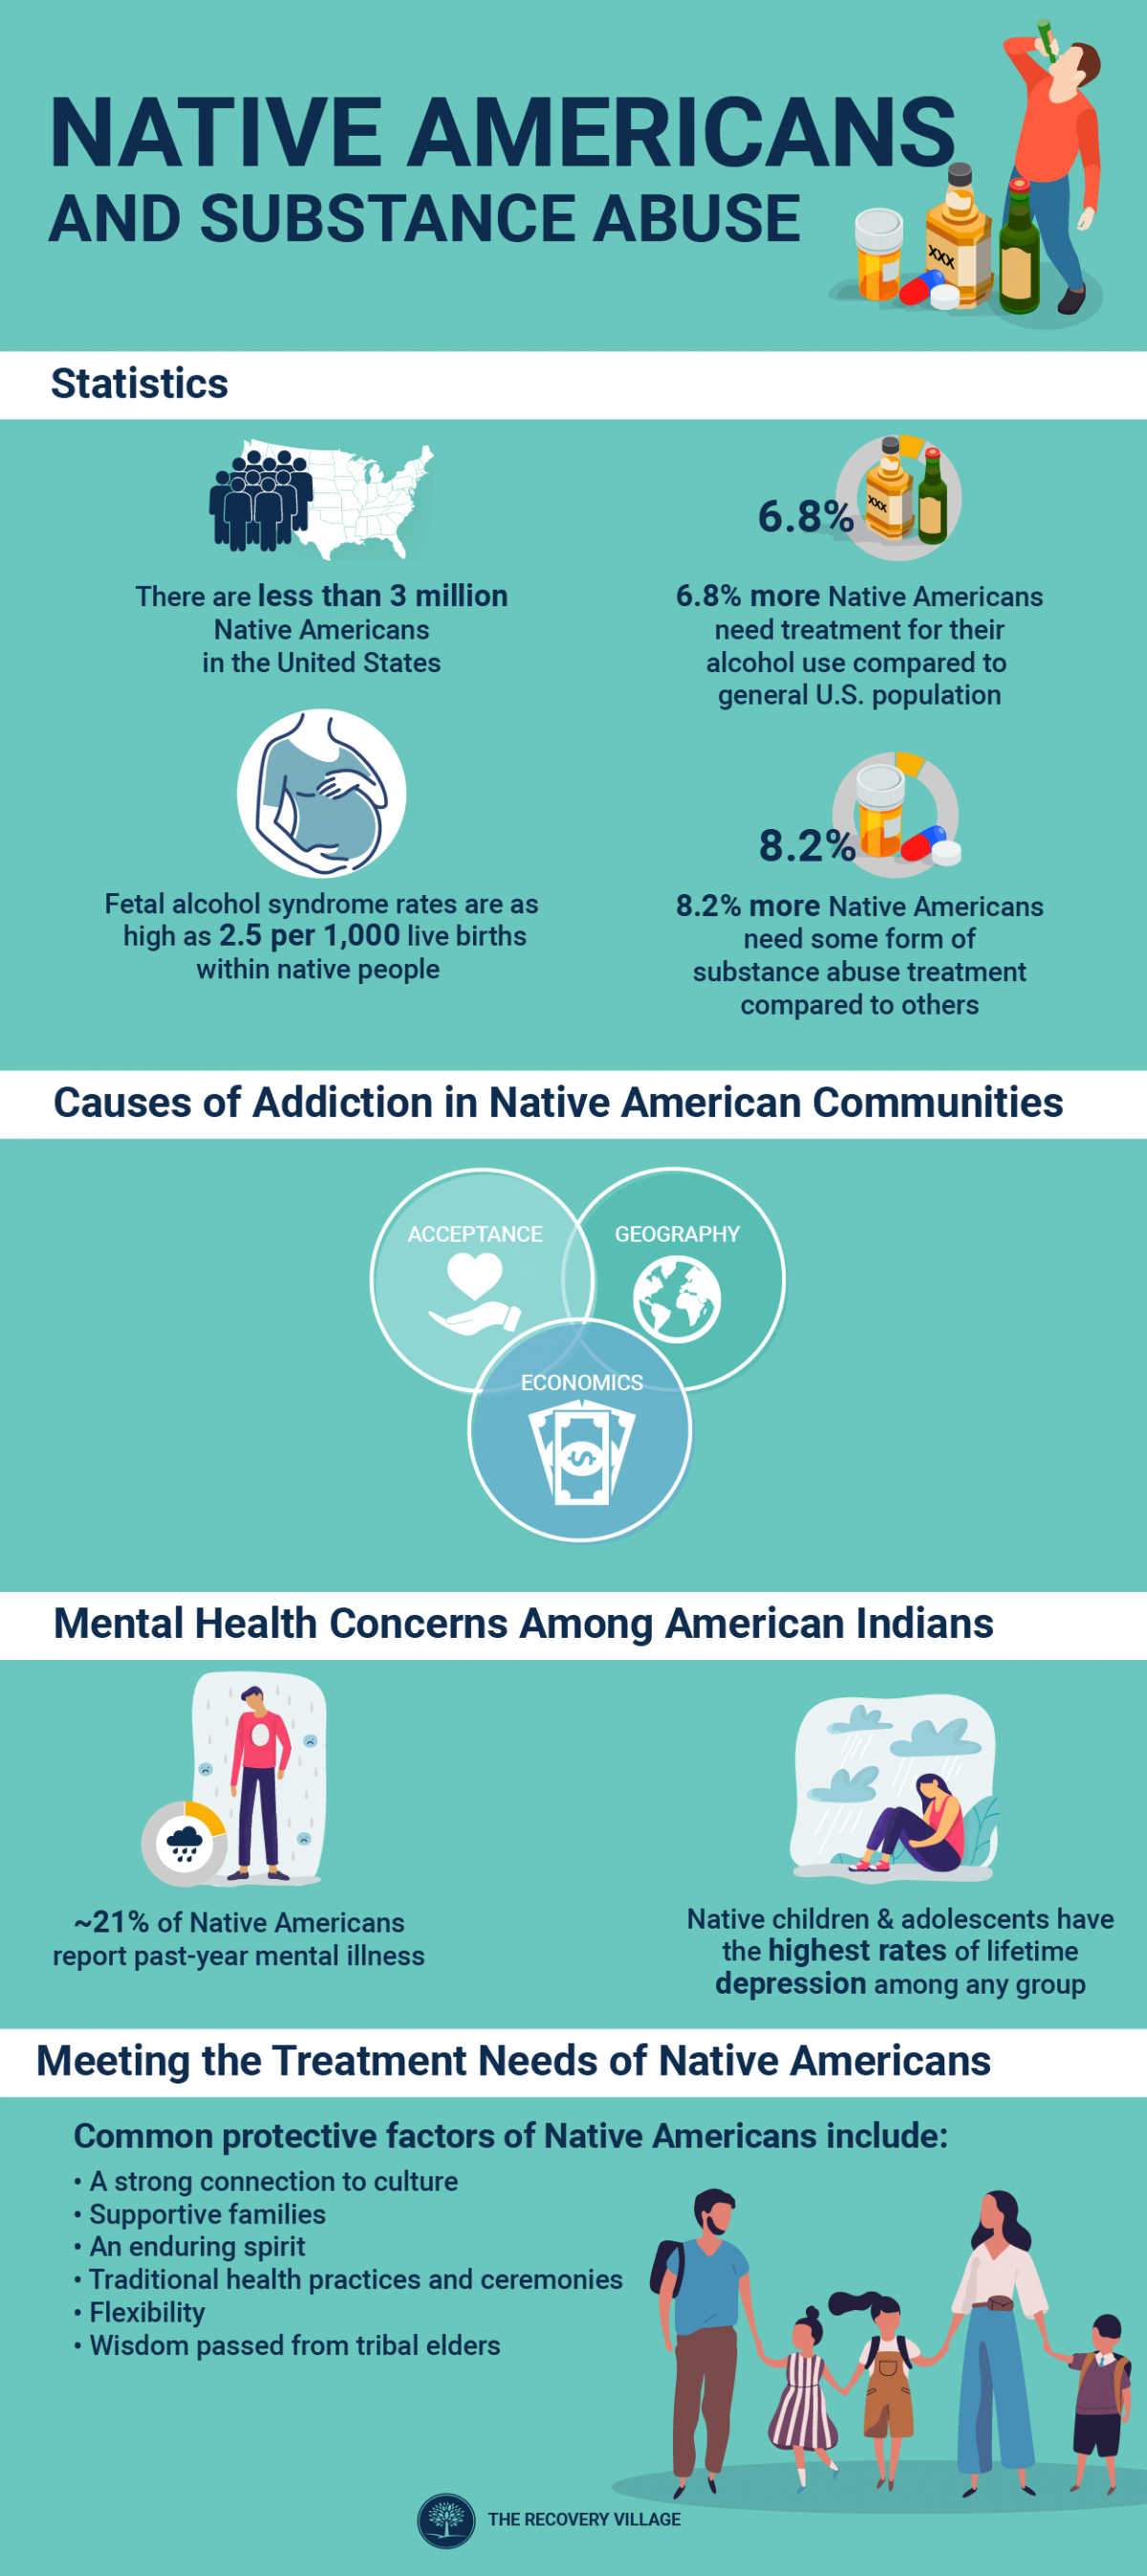 Native Americans and Substance Abuse infographic